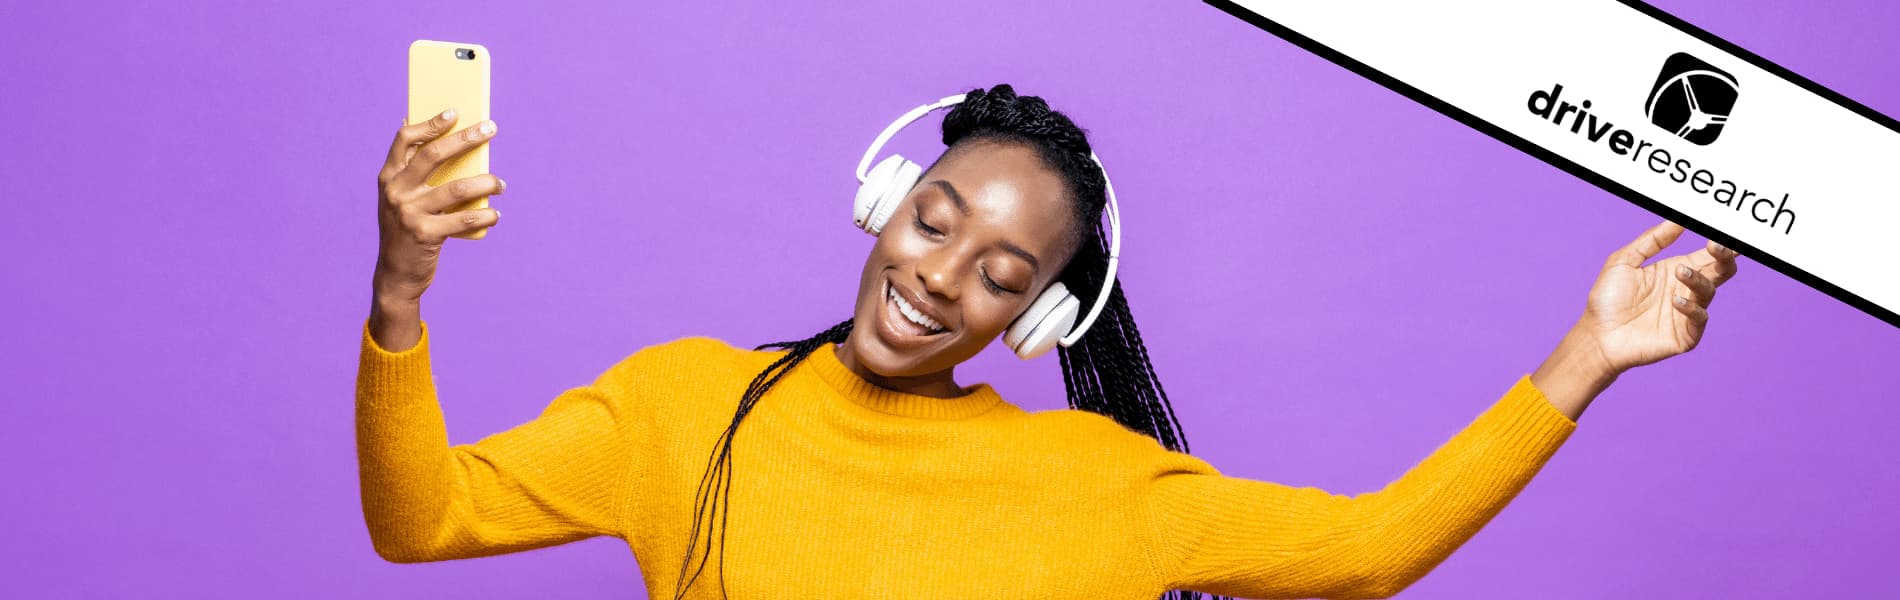 woman listening to music streaming app